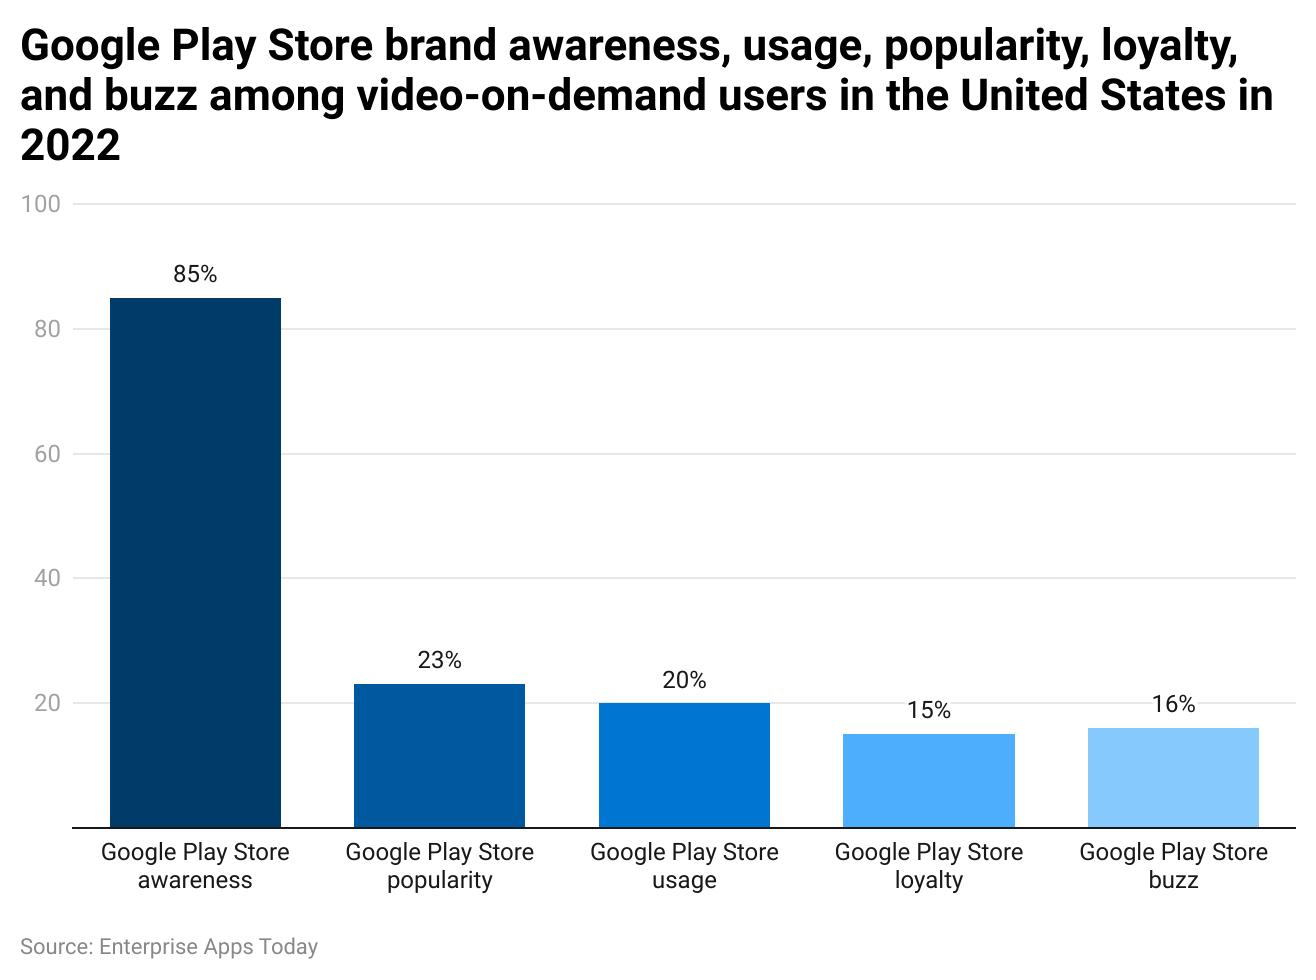 -google-play-store-brand-awareness-usage-popularity-loyalty-and-buzz-among-video-on-demand-users-in-the-united-states-in-2022